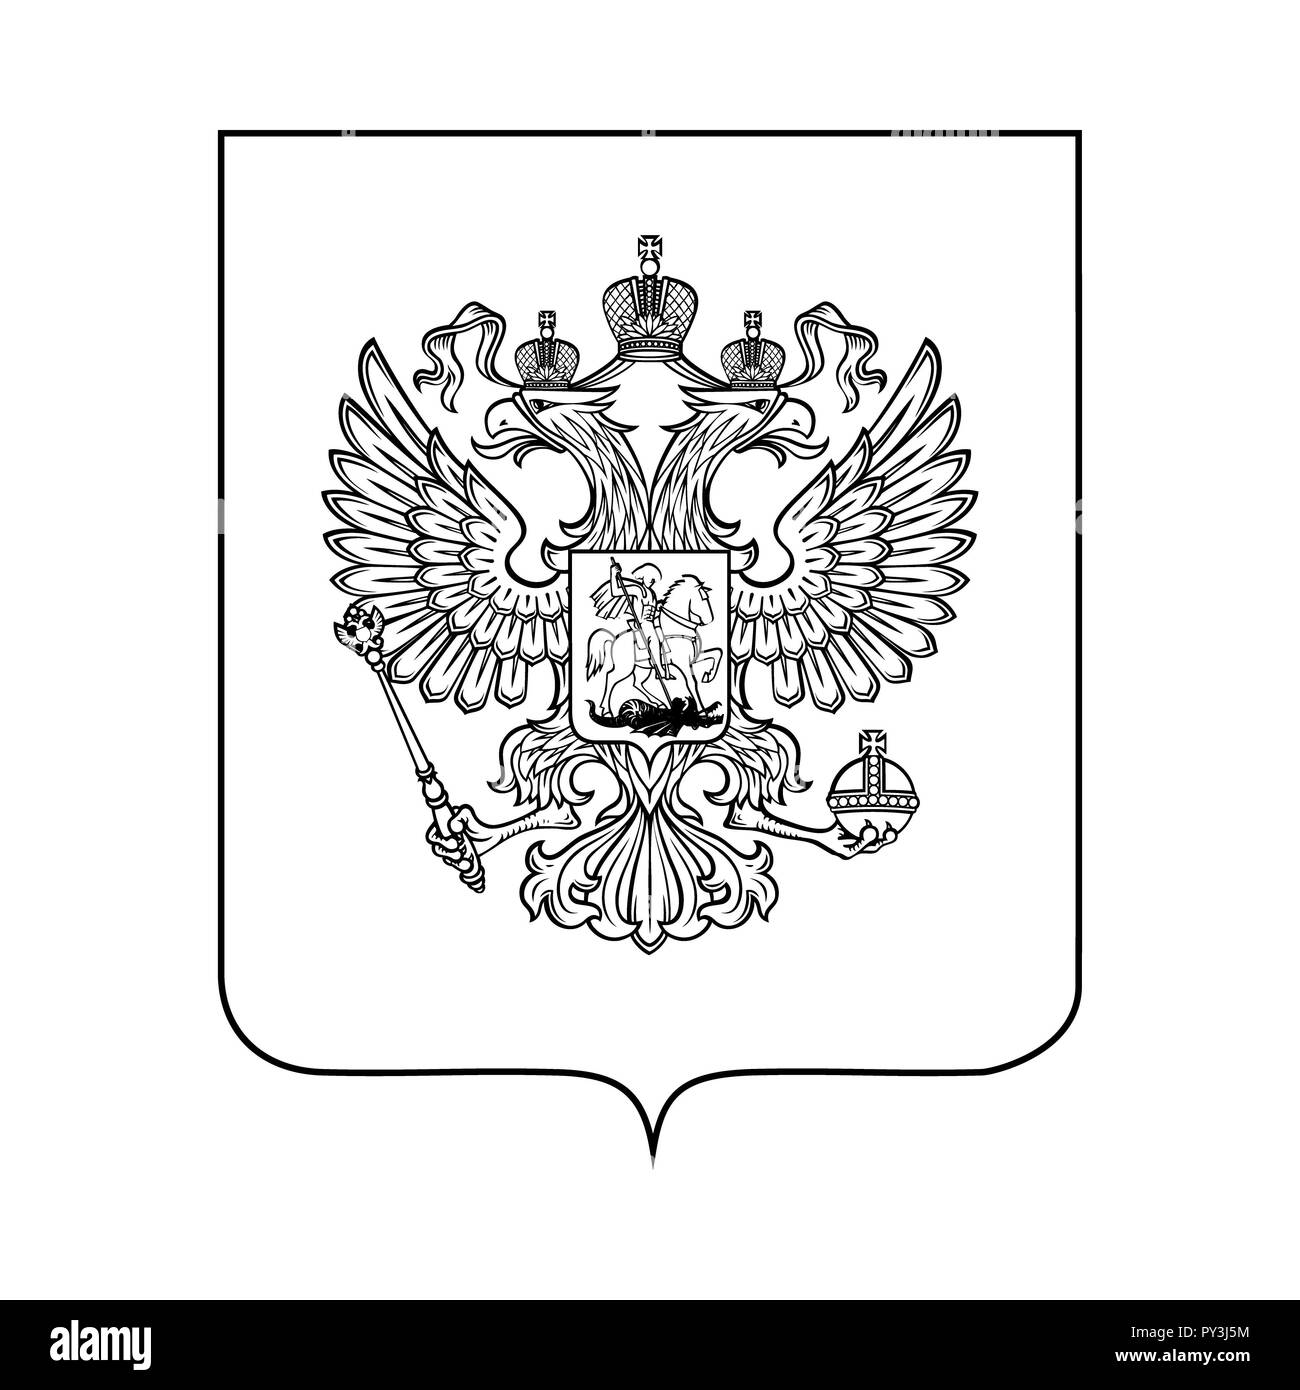 Symbol of Russia. Black and white emblem Stock Photo